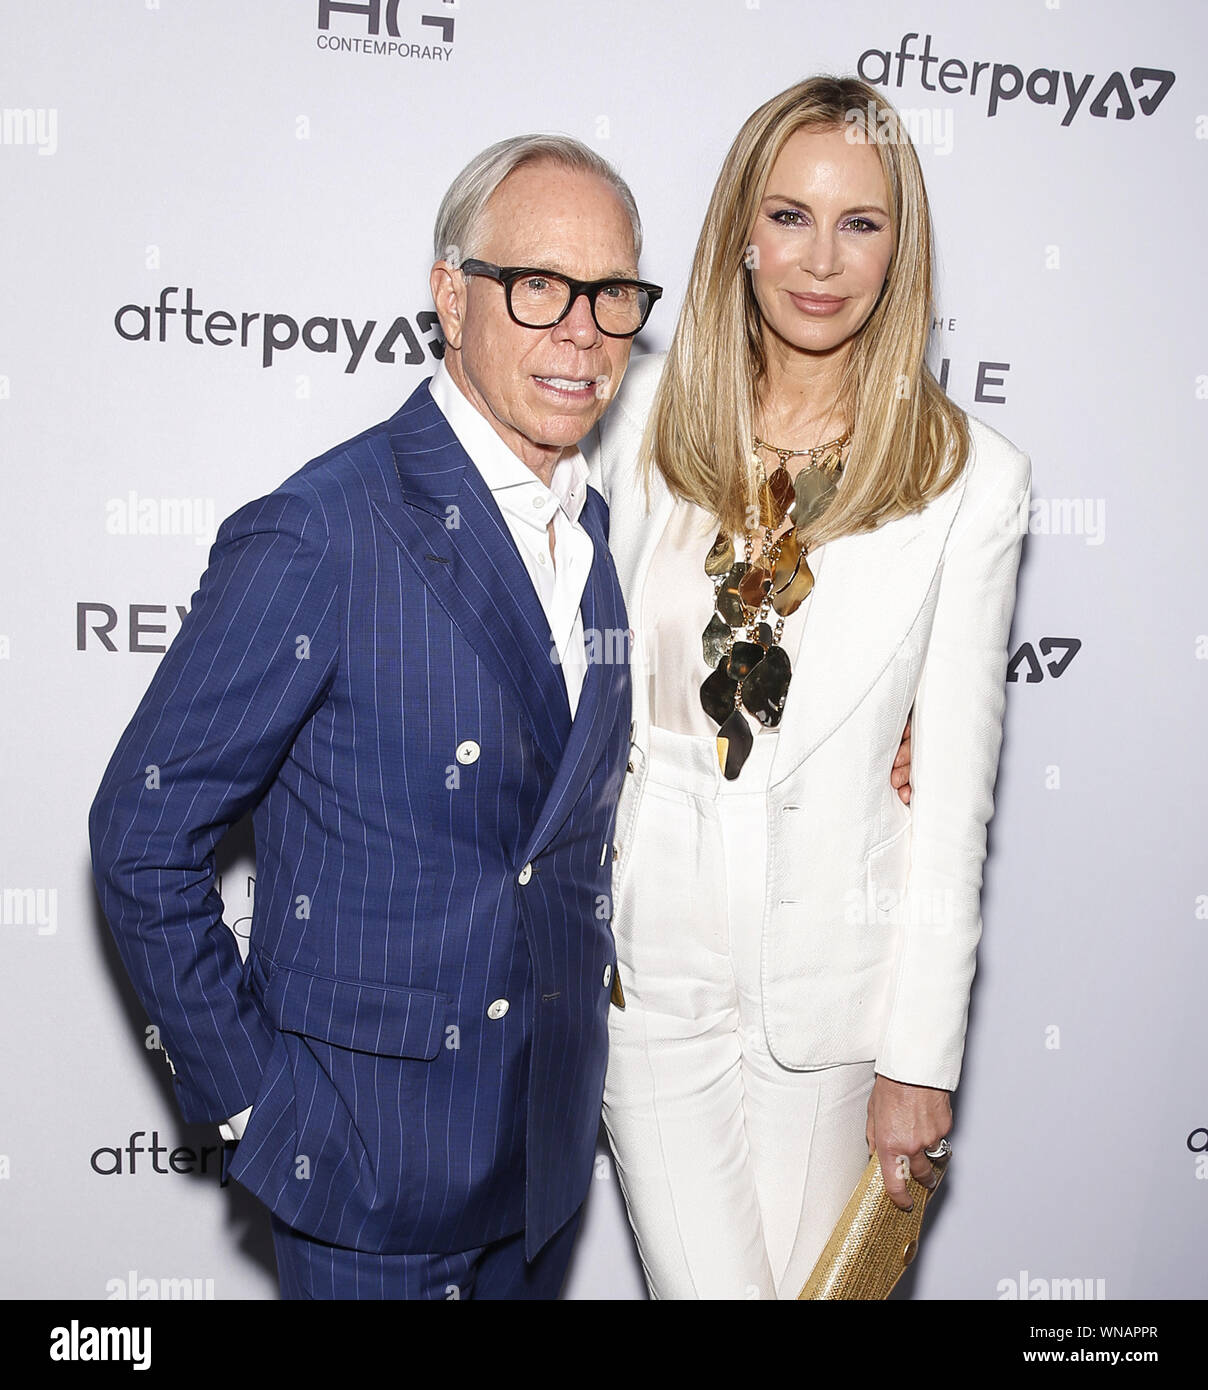 NEW YORK, NY - September 05, 2019: Tommy Hilfiger and Dee Ocleppo ...